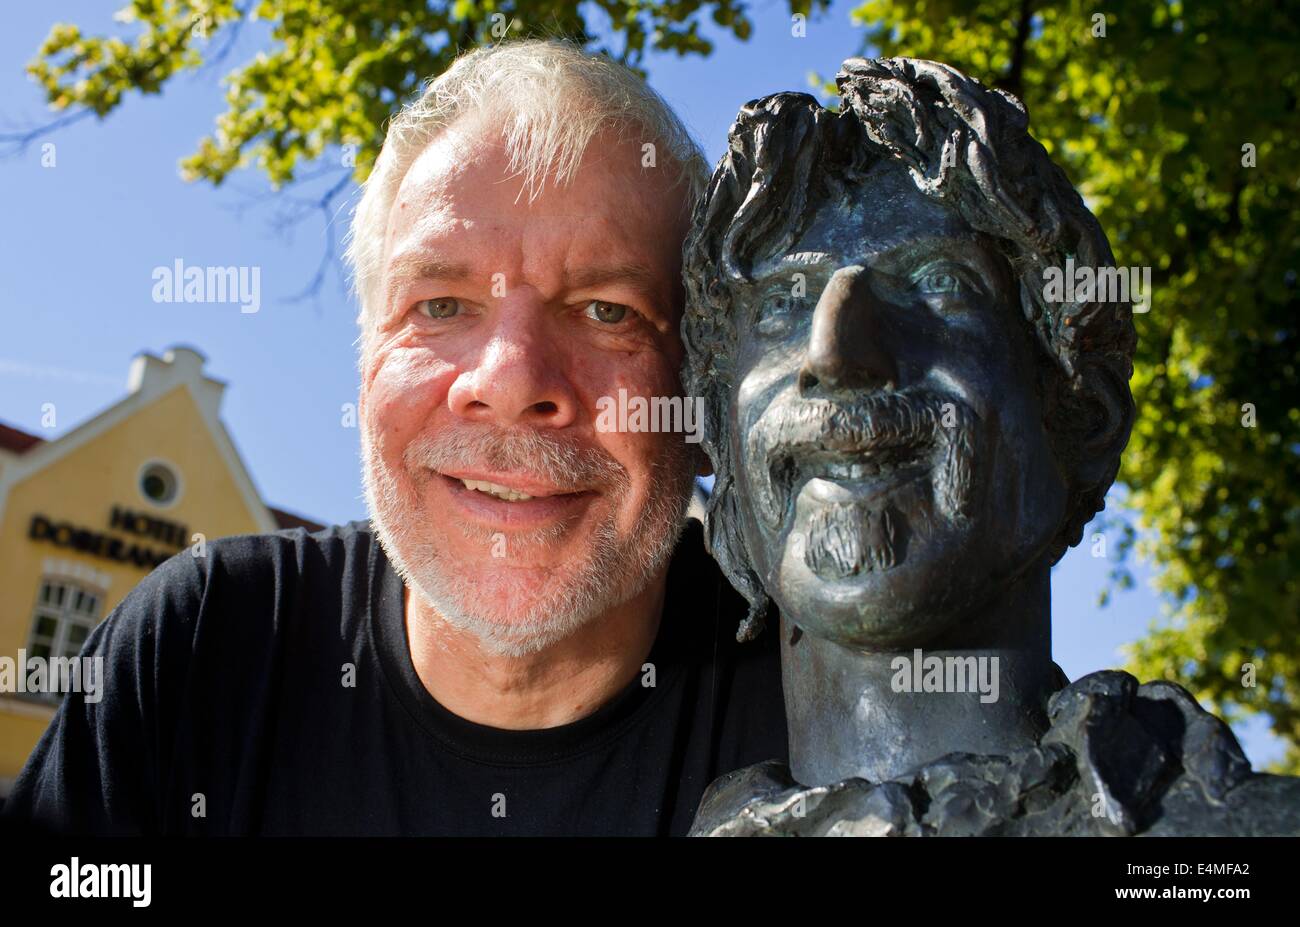 Bad Doberan, Germany. 11th July, 2014. The director and founder of the ...